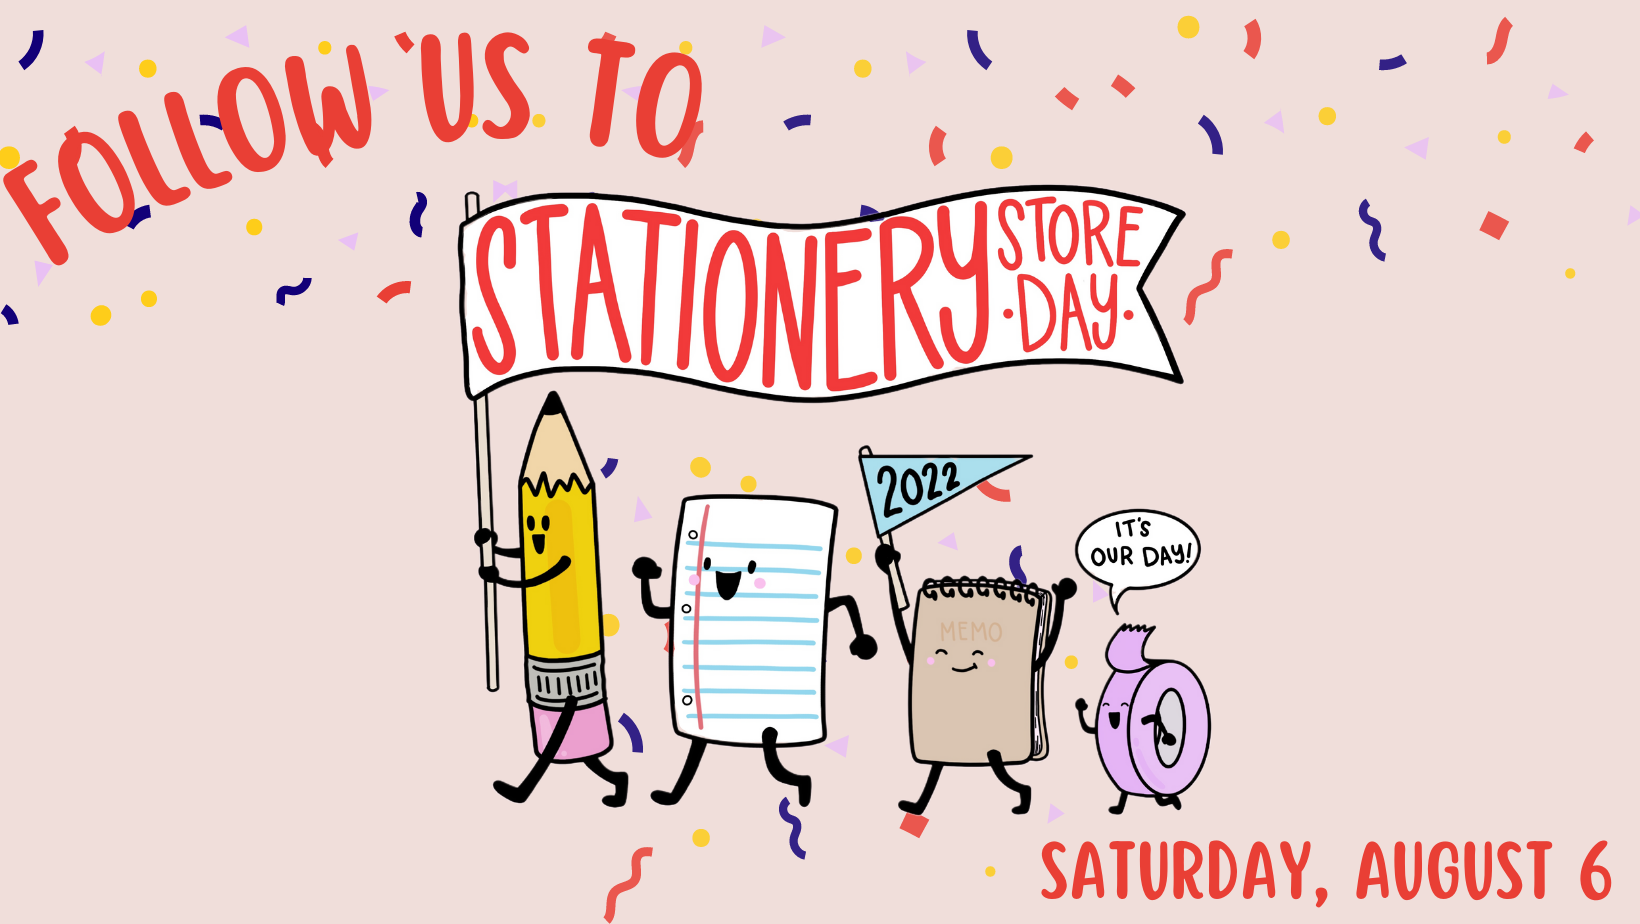 A cartoon pencil, sheet of ruled notebook paper, notepad, and roll of tape say, "Follow Us to Stationery Store Day" Under the drawing is the date's event, August 6